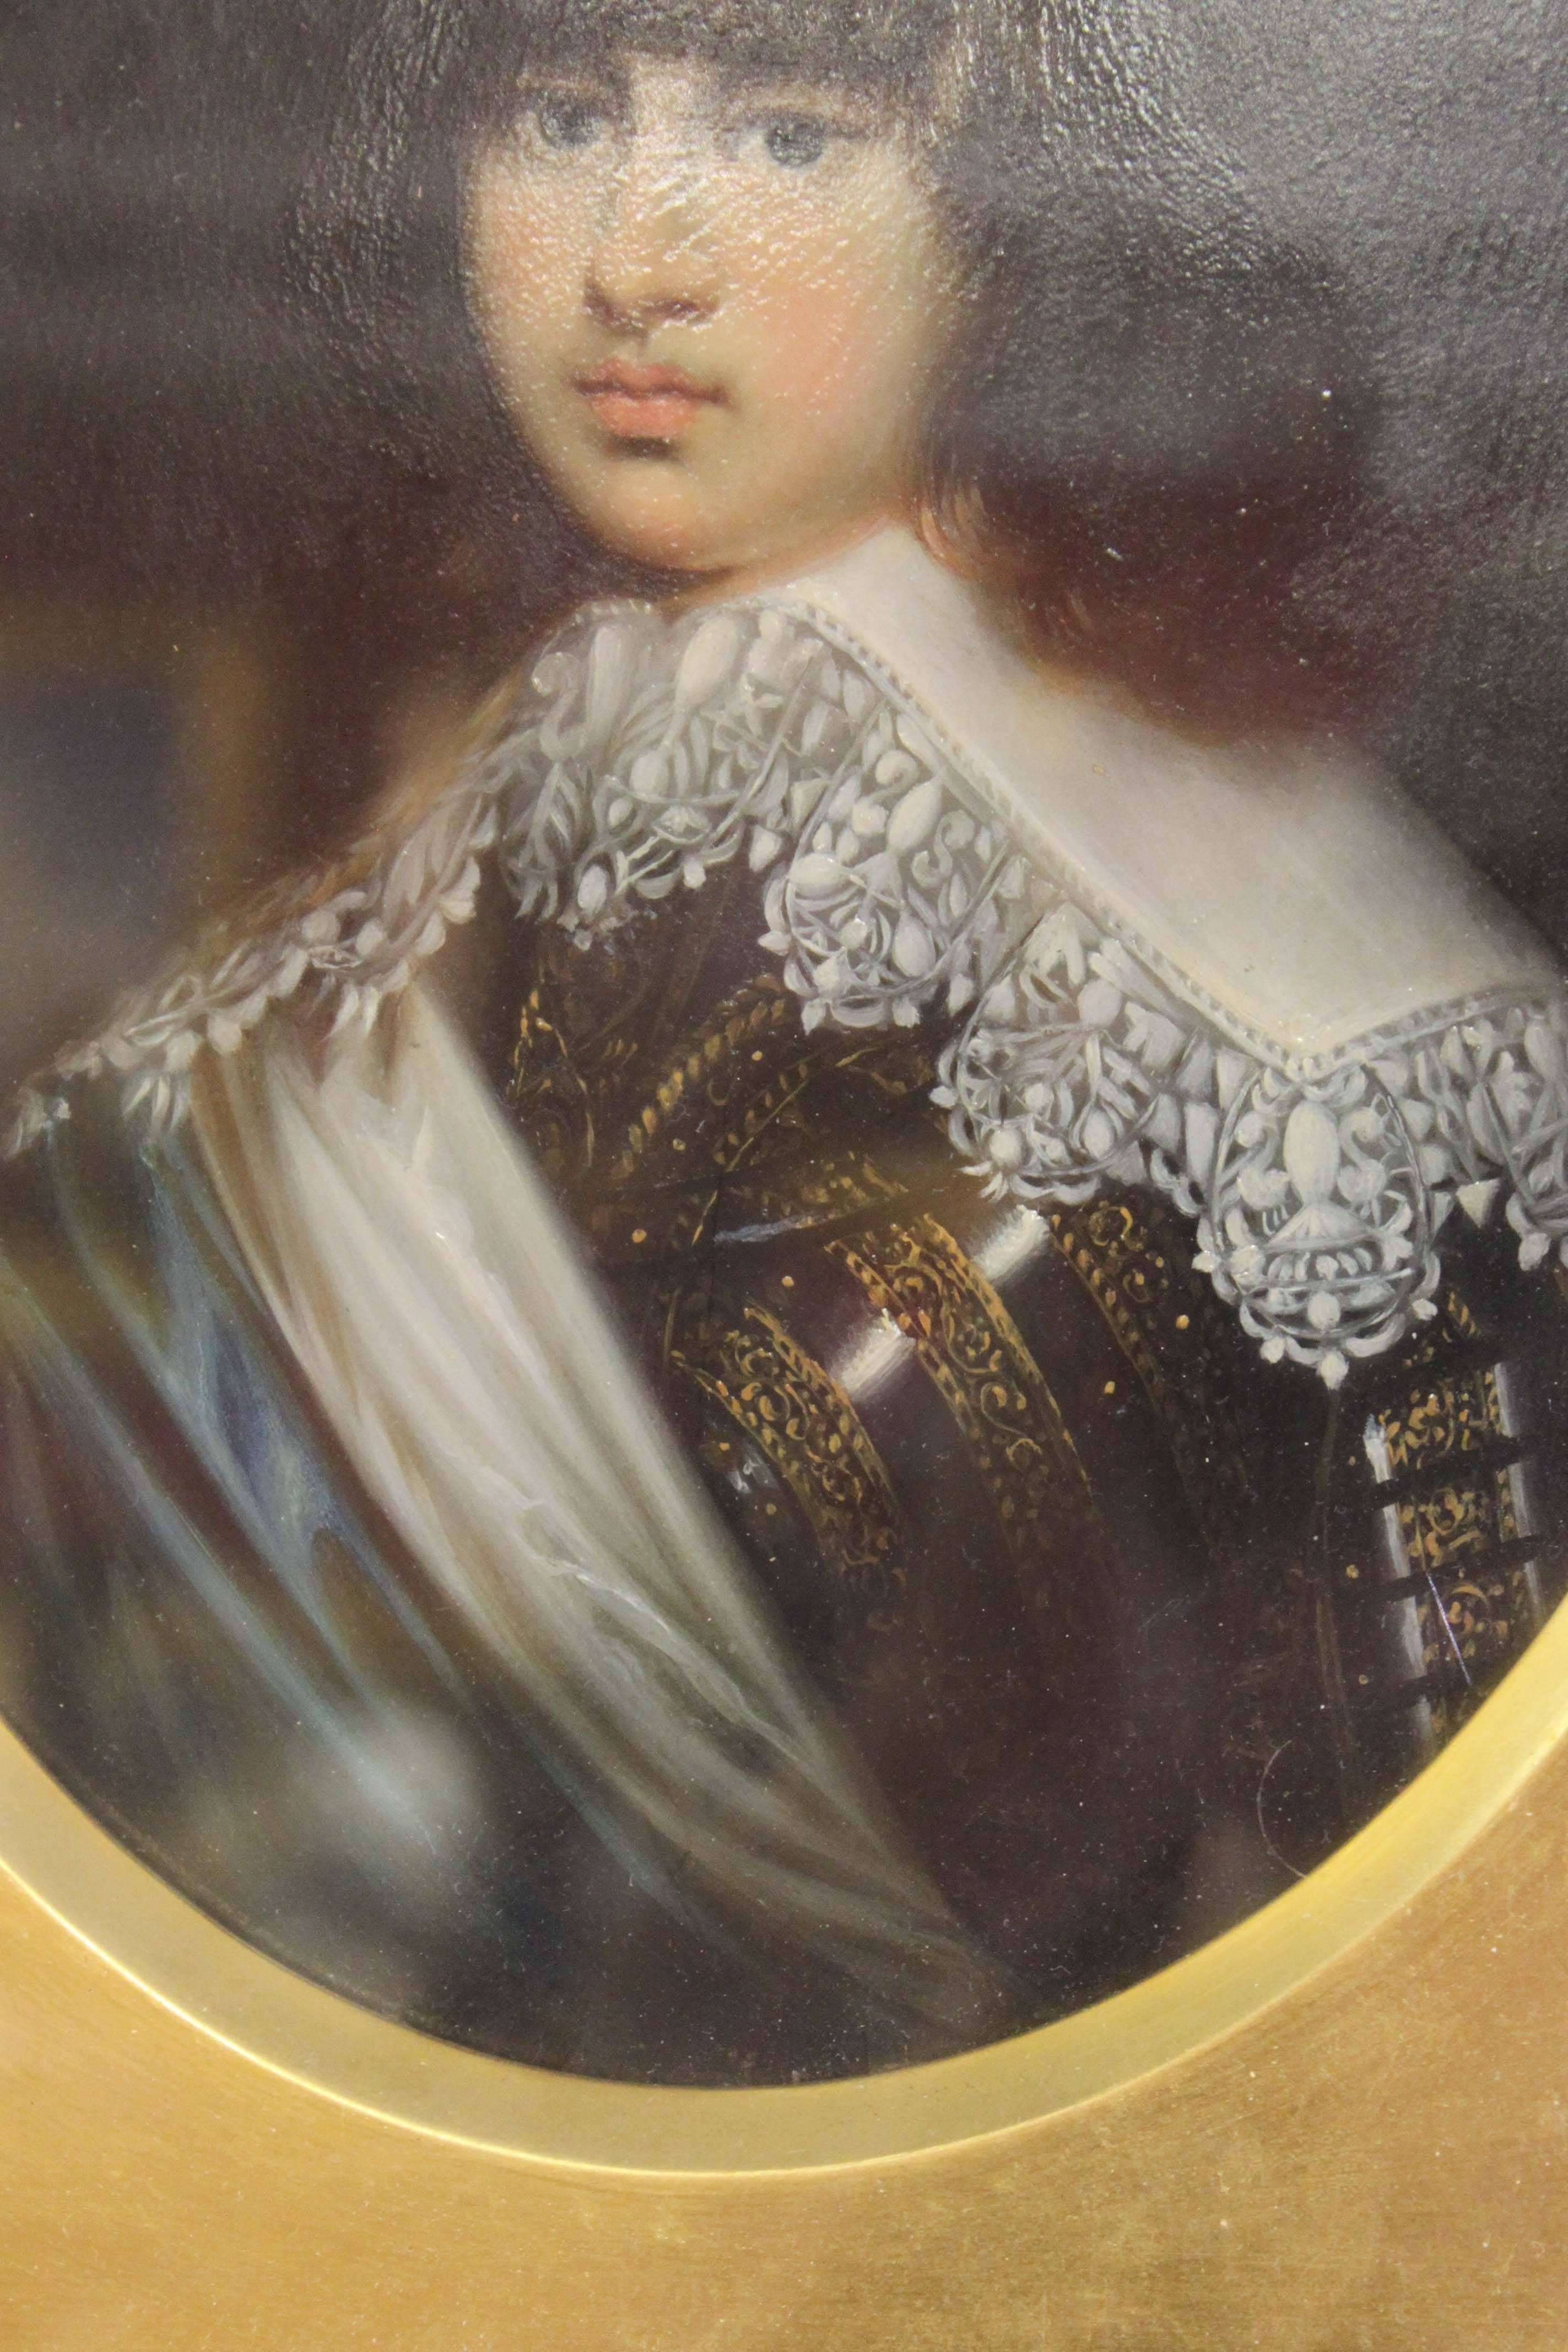 This is a copy by Sastermans of a 17th century painting, entitled the ‘Young Prince of Denmark’. Oil painting on panel, under glass in a gold leaf frame.
